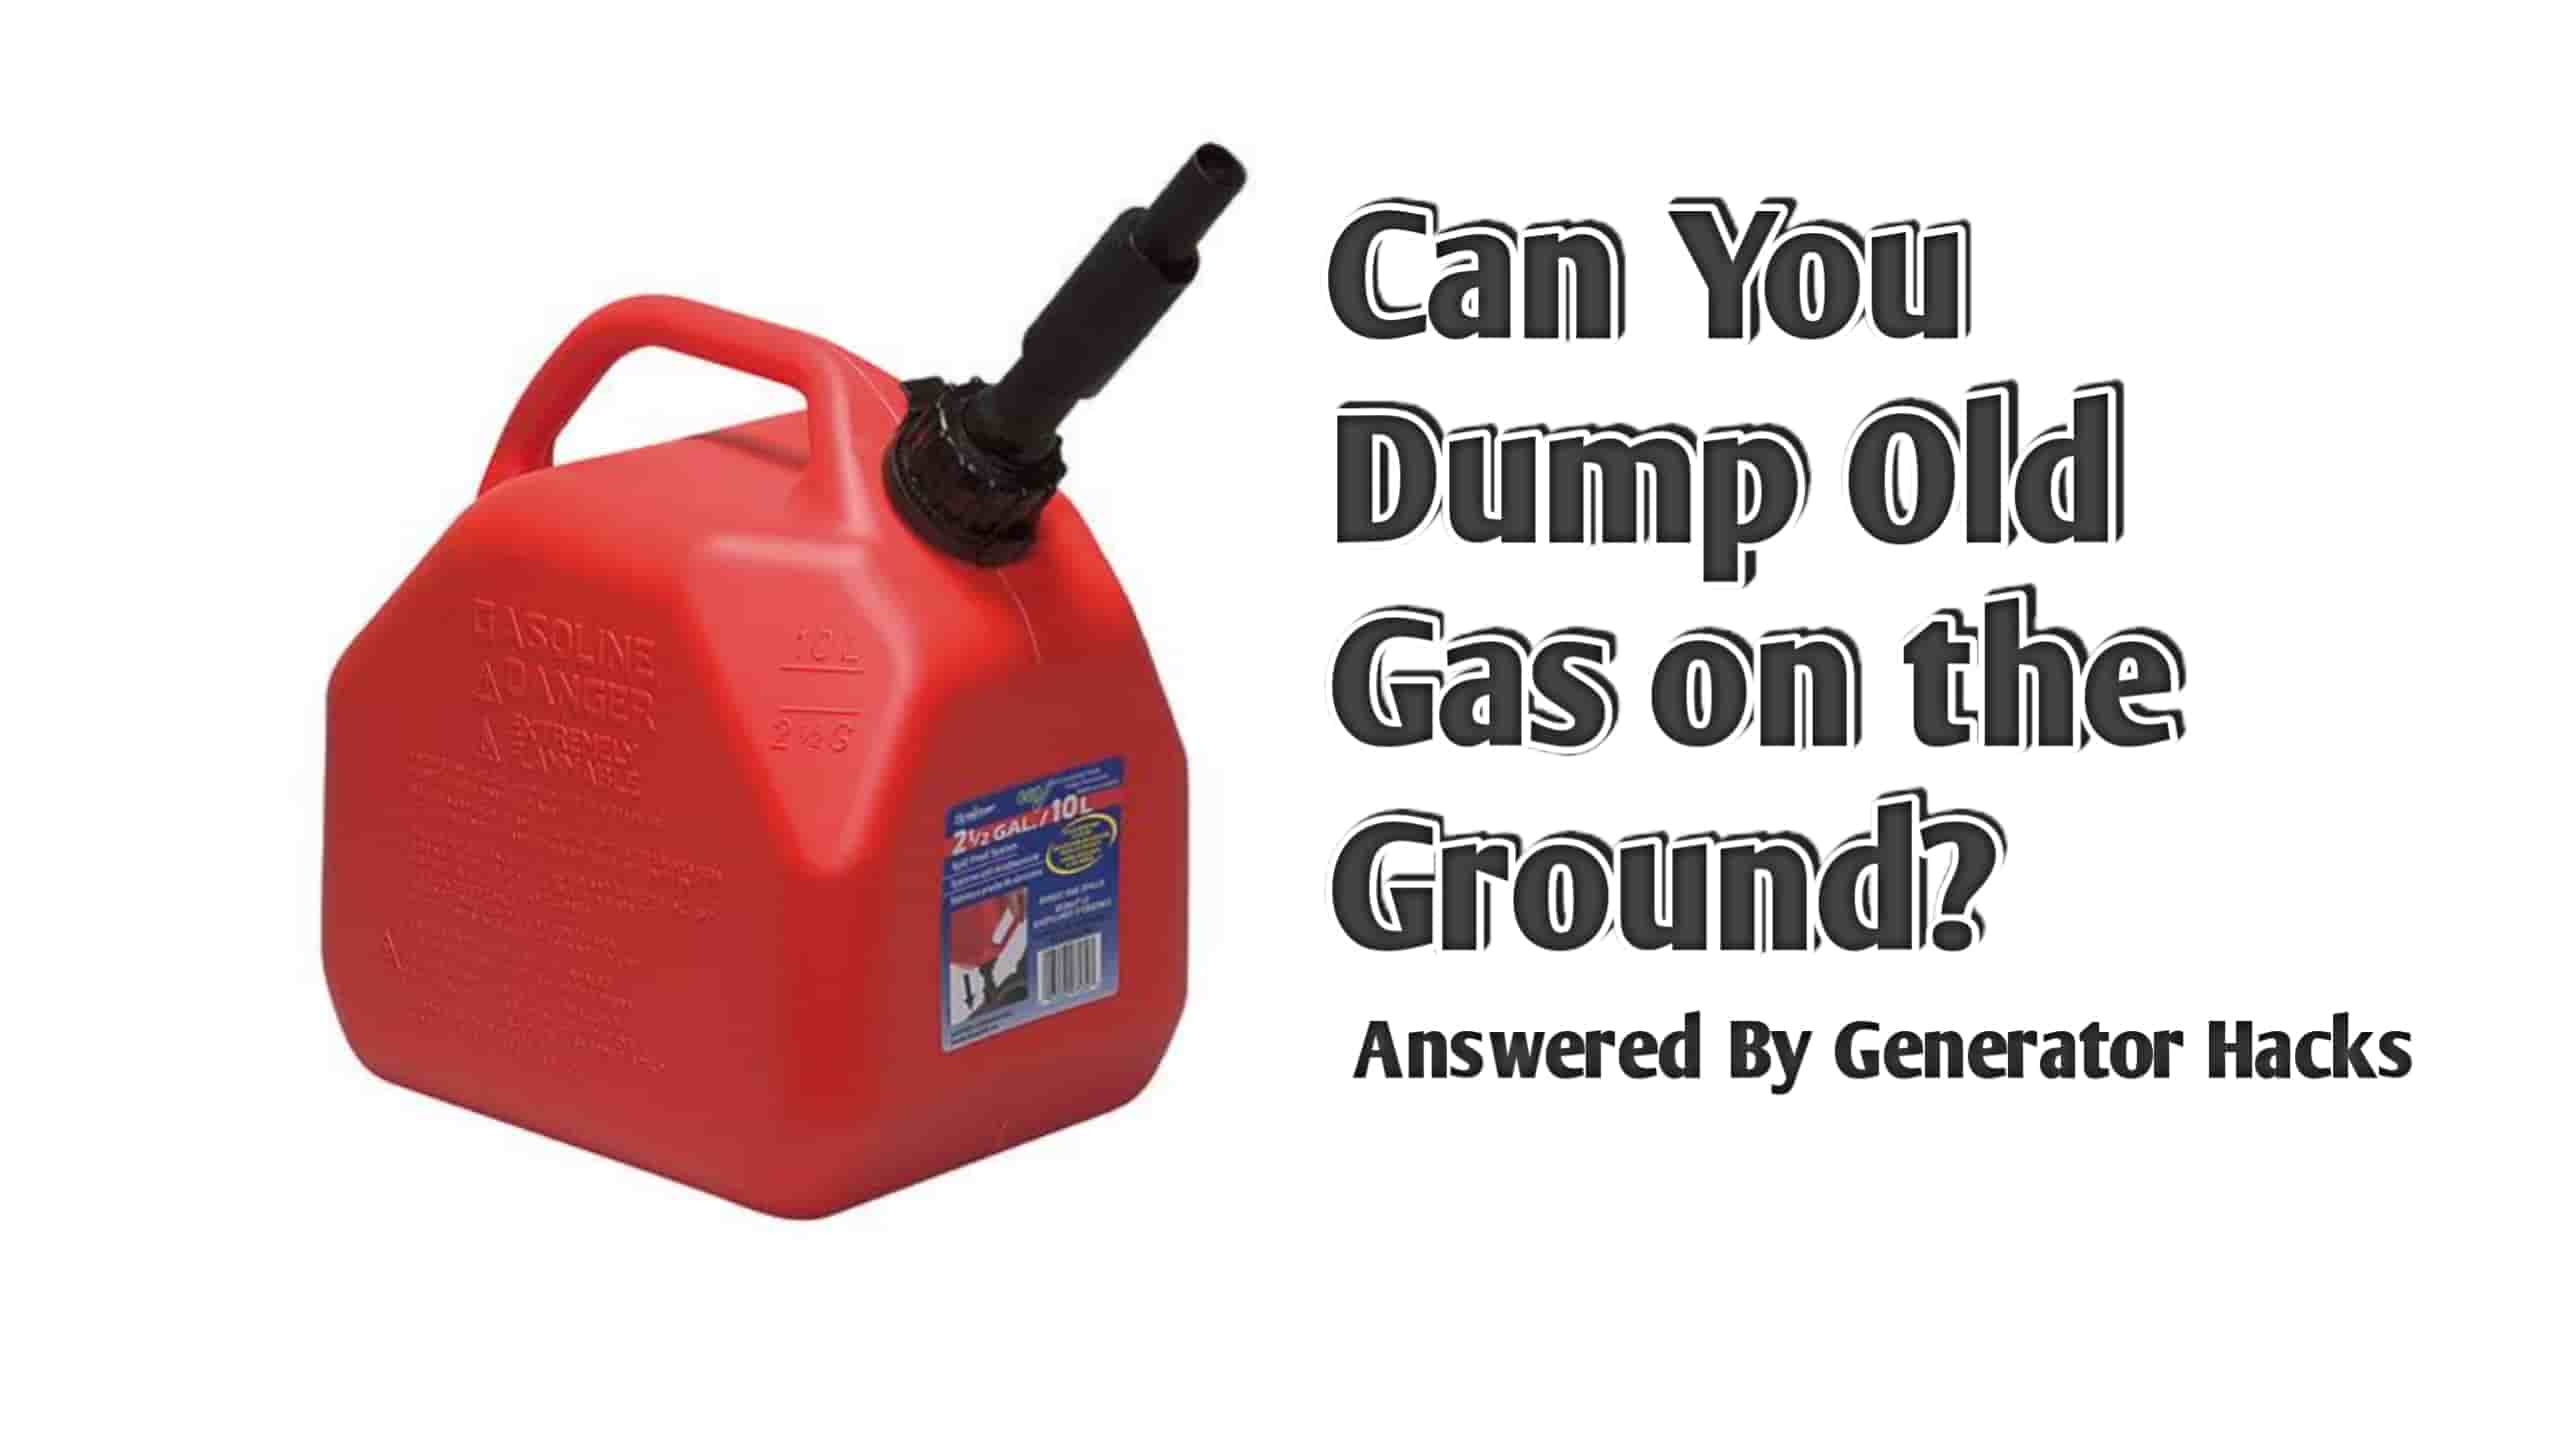 Can You Dump Old Gas on the Ground,